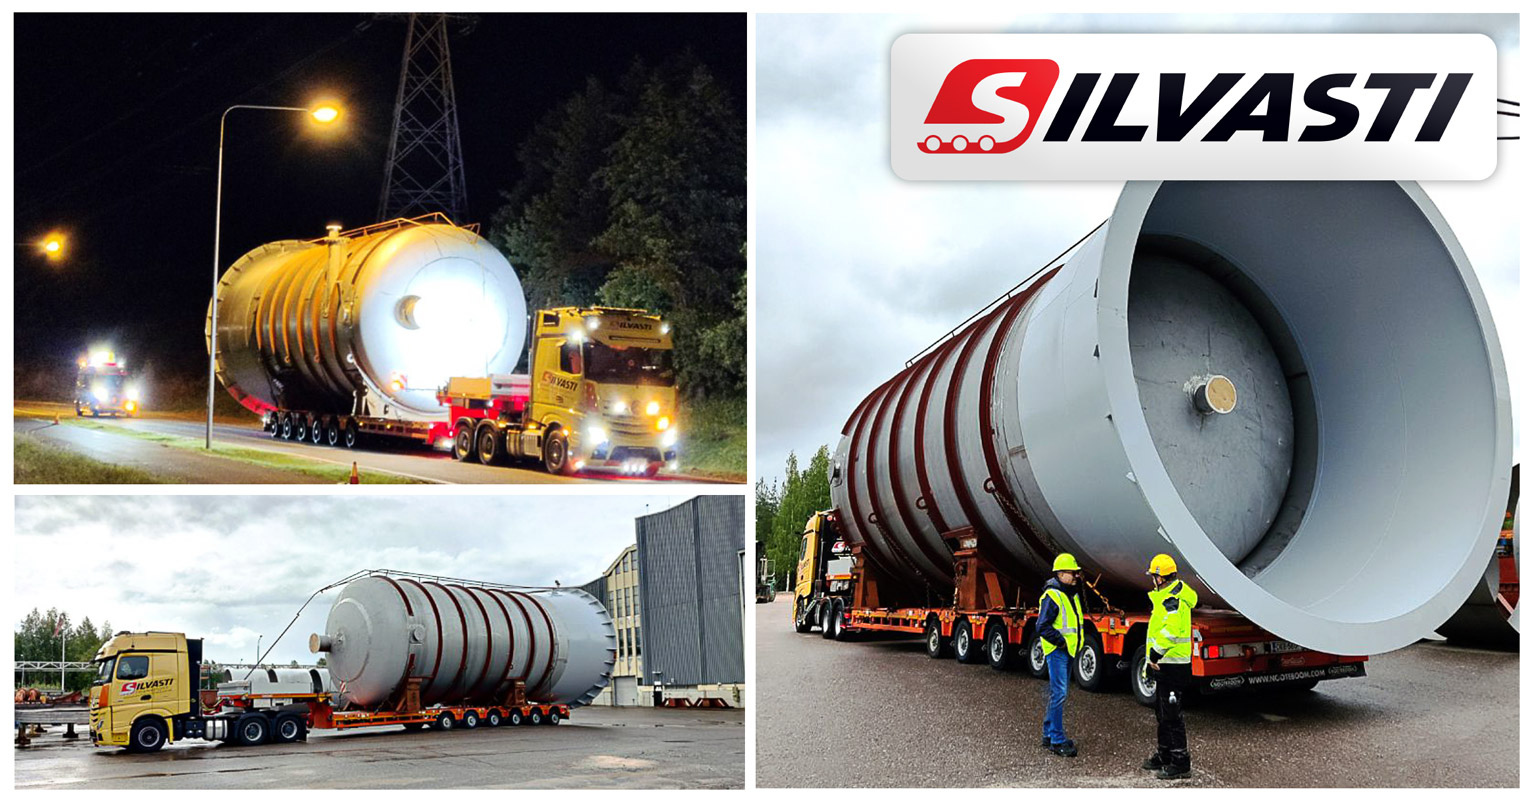 Silvasti Transported a Cylinder Weighing 40t, Measuring 15m long and up to 7m in Diameter